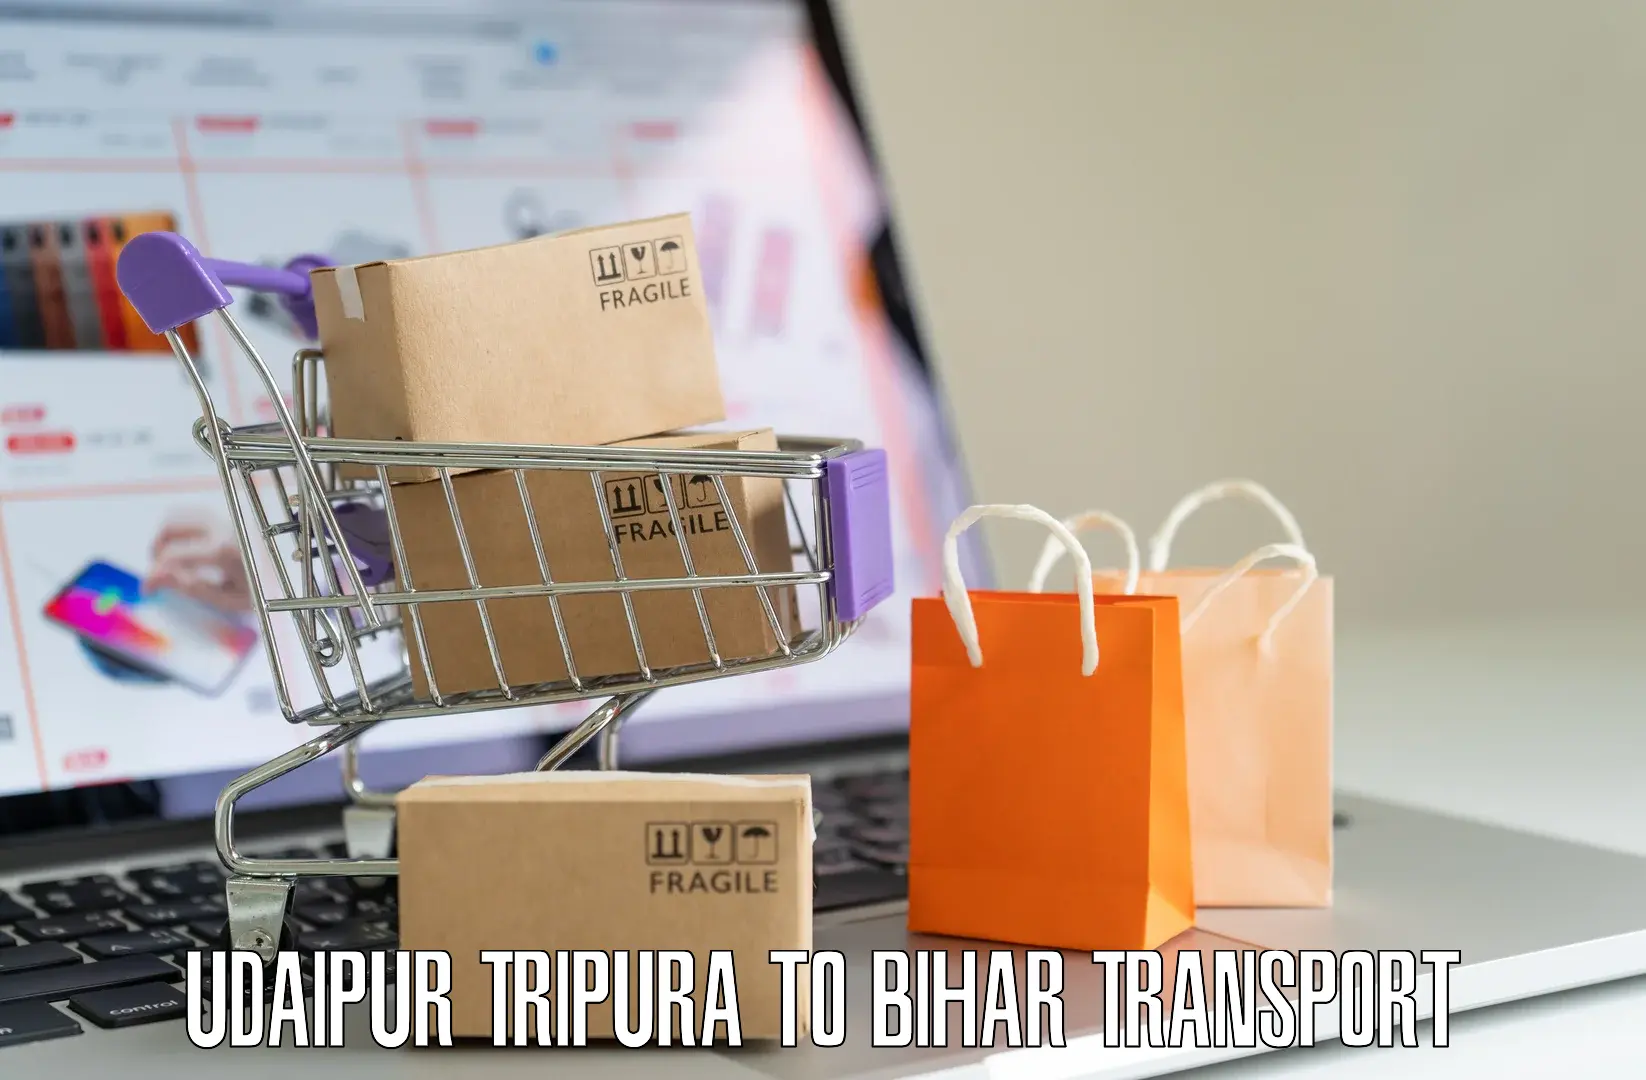 Commercial transport service Udaipur Tripura to Araria